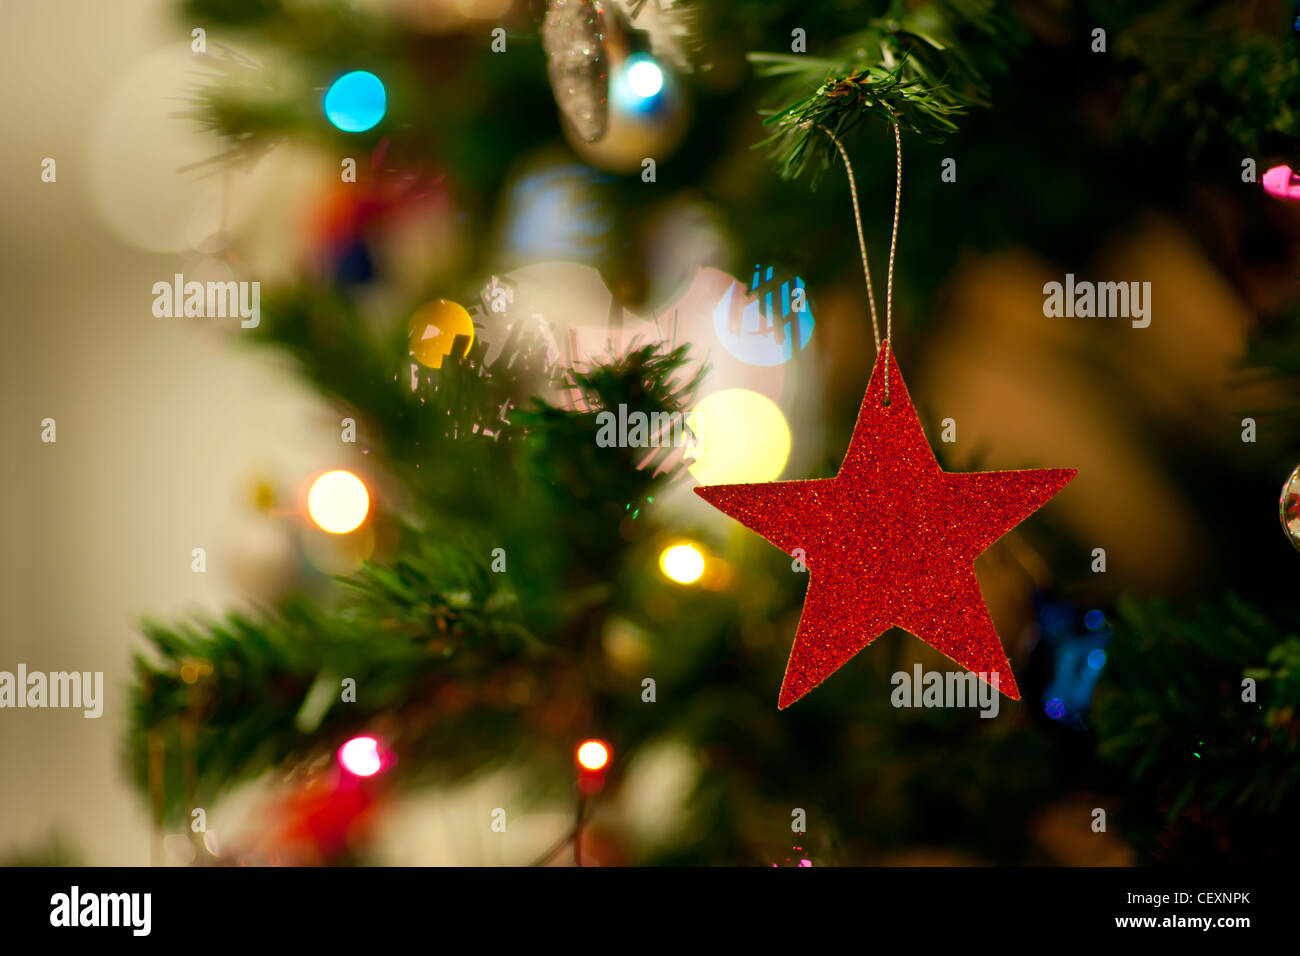 Blurred of christmas light, Can be used as background Stock Photo